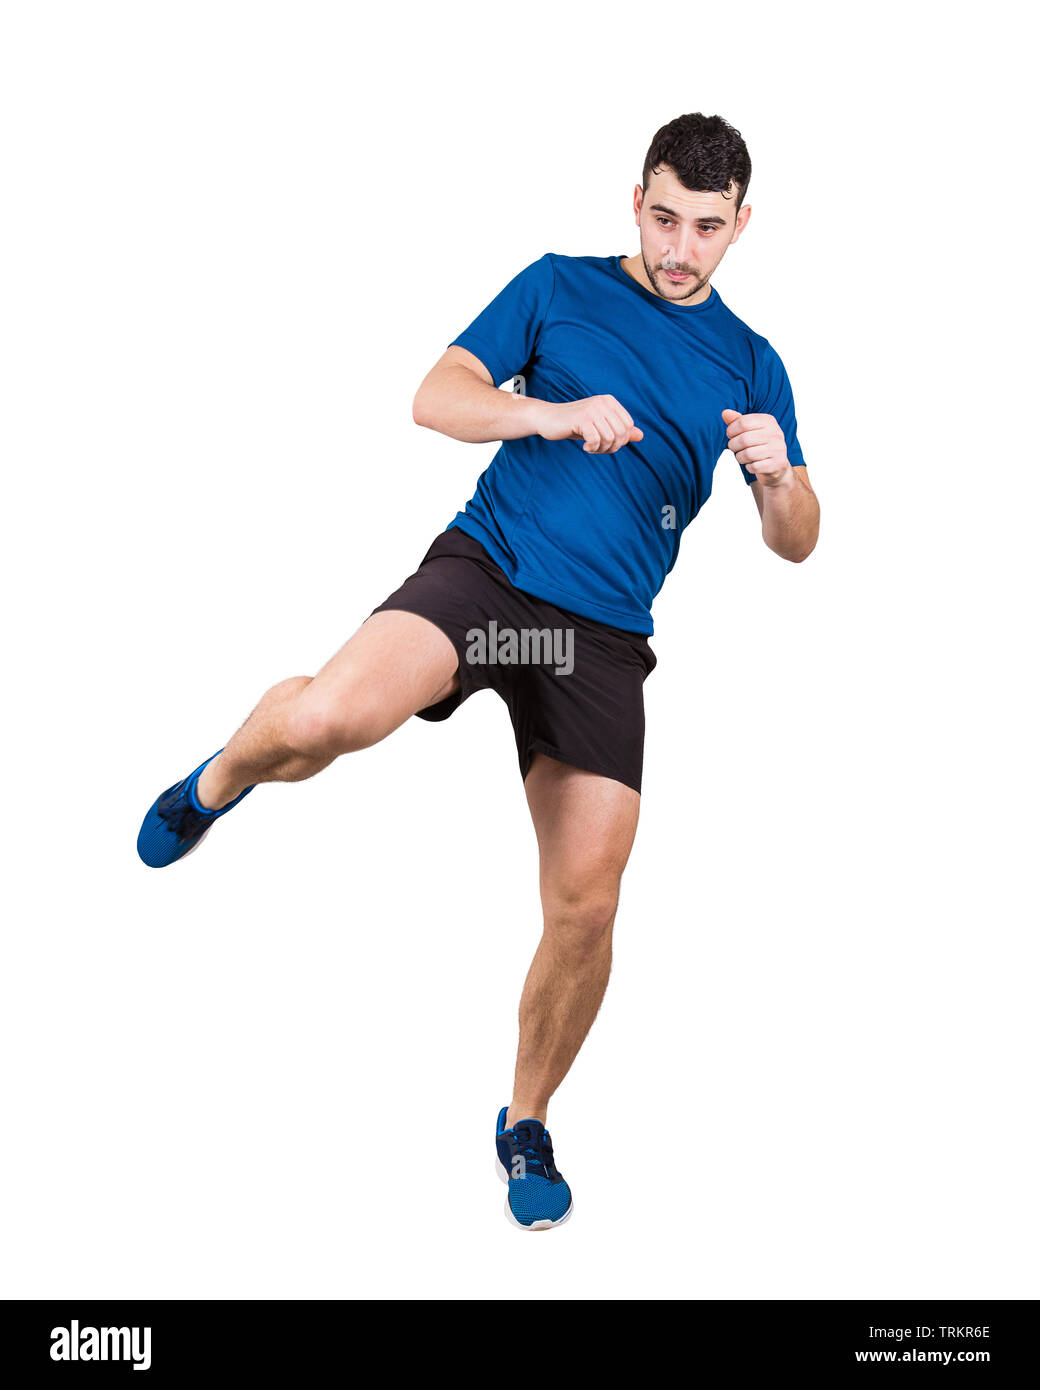 Full length portrait of young man athlete or fighter making a leg kick isolated over white background. Sporty caucasian guy boxer training. Stock Photo